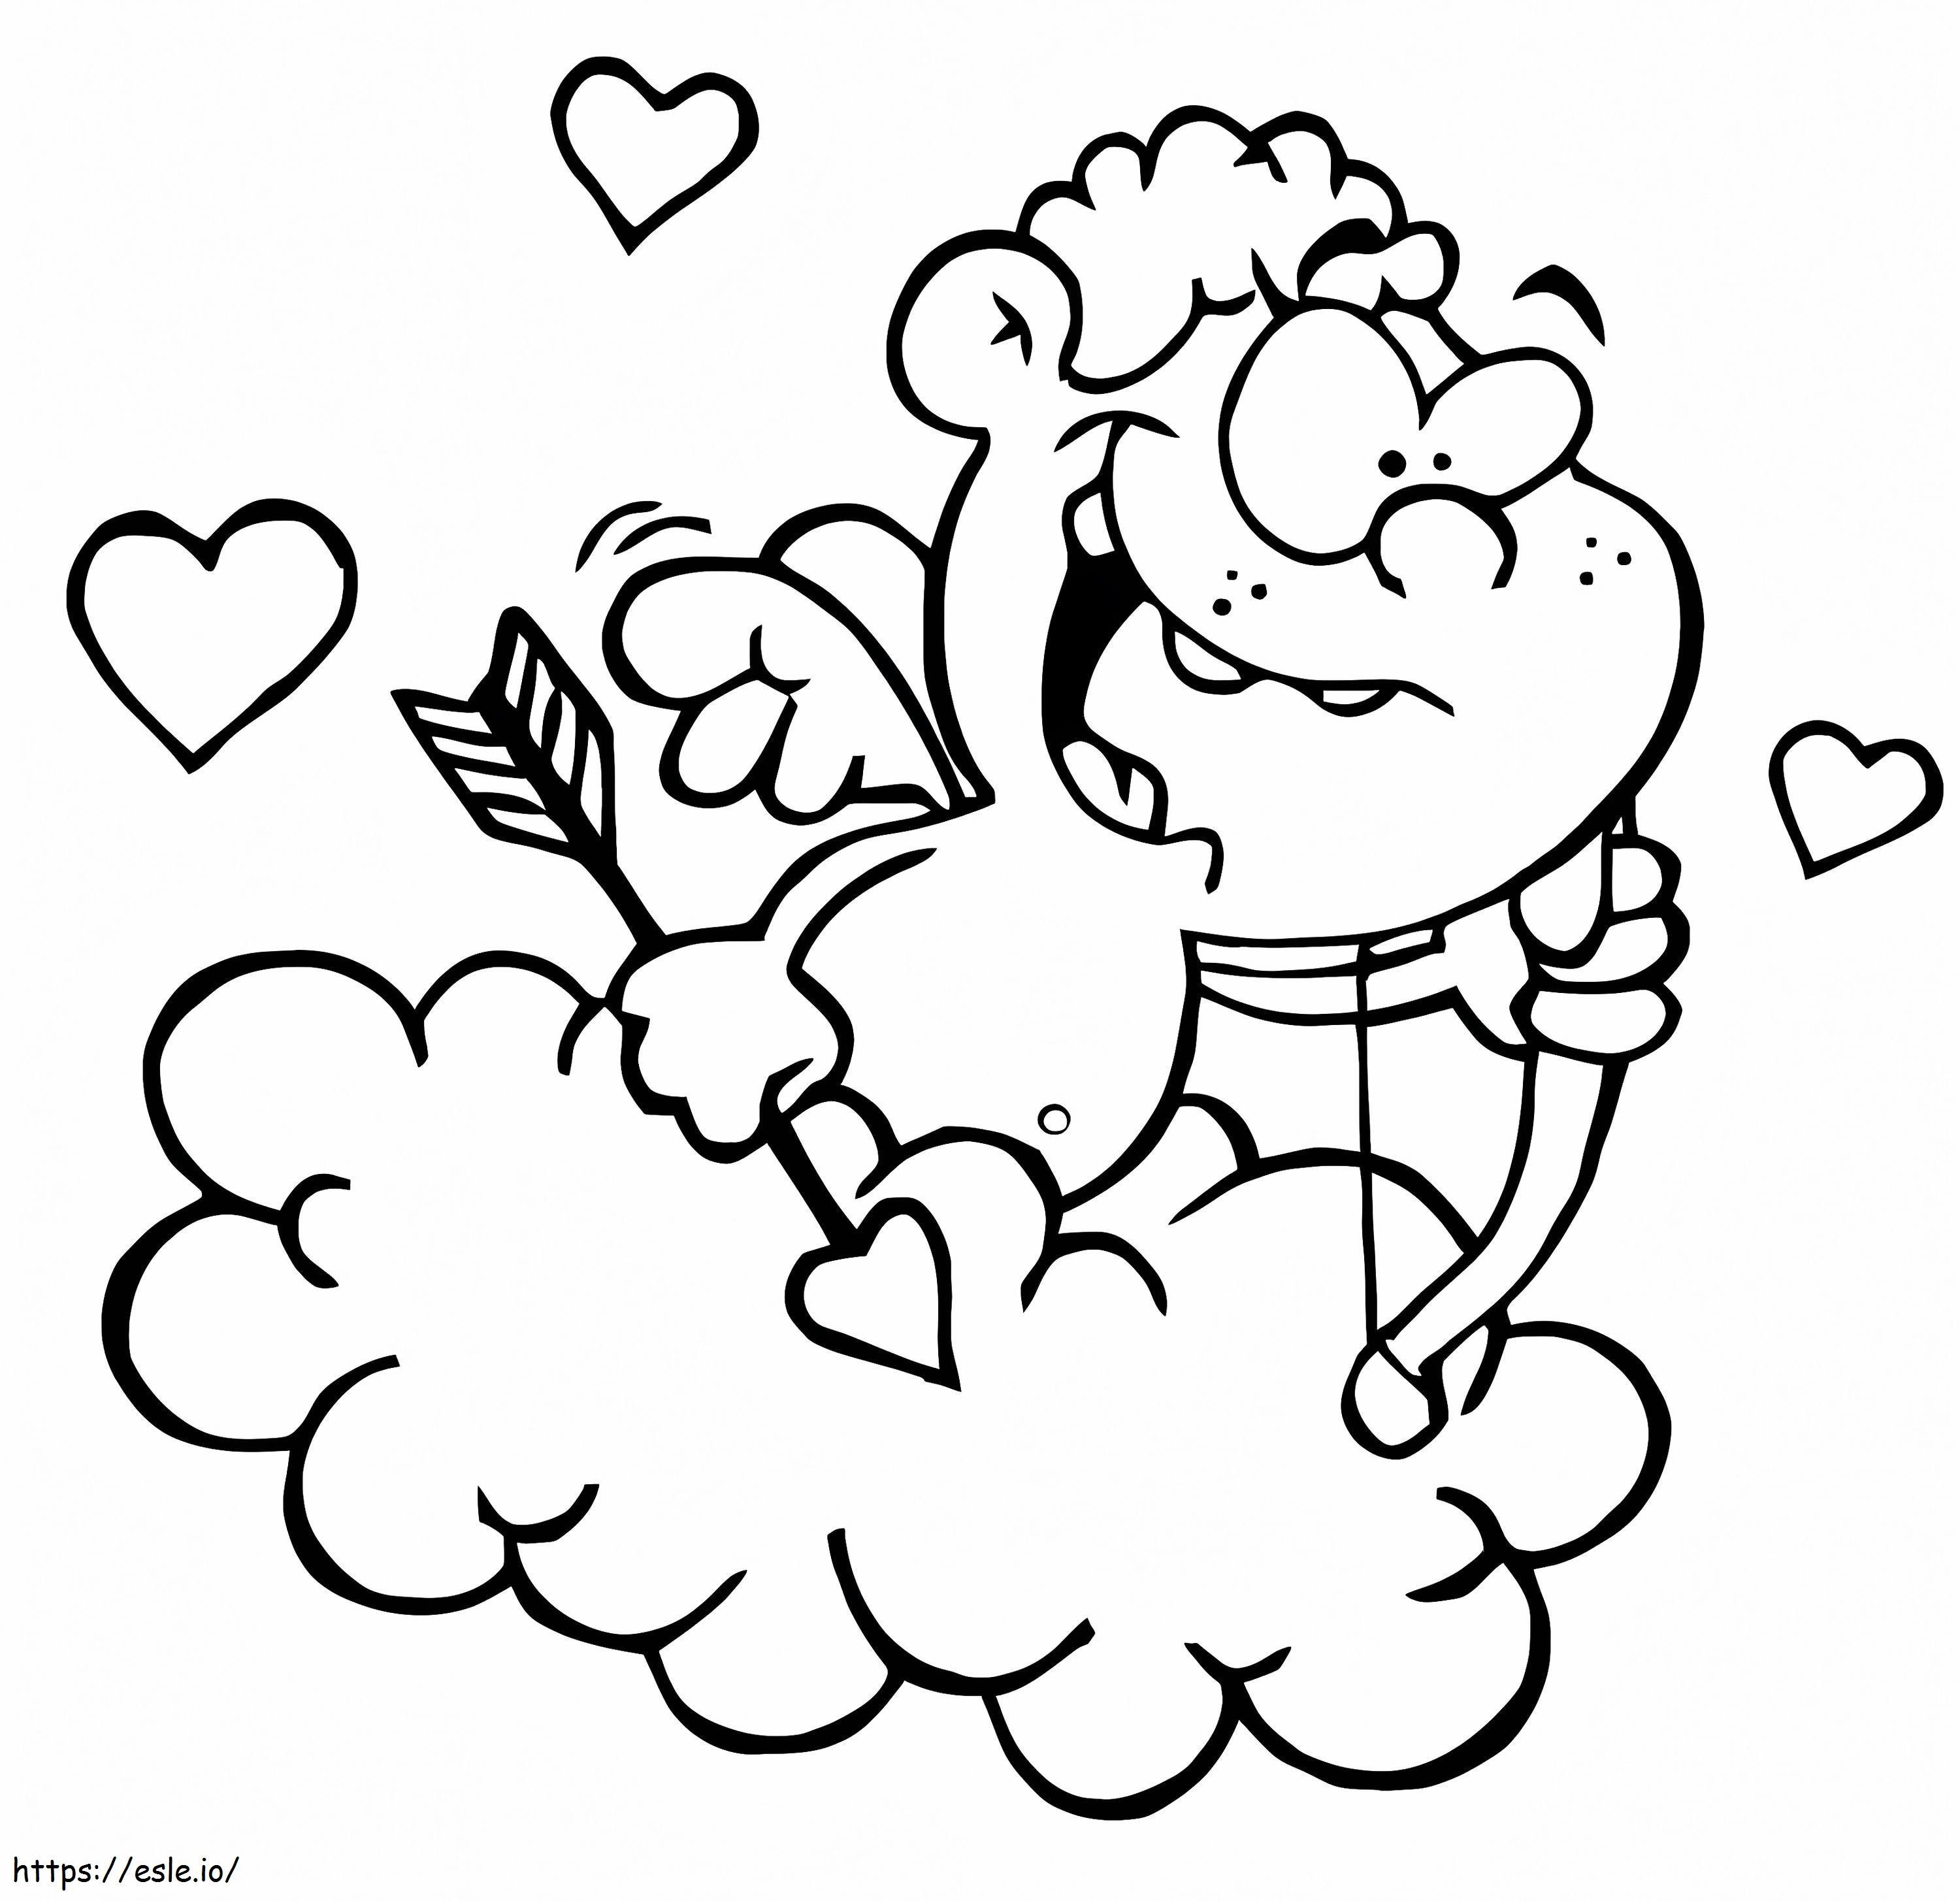 Funny Cupid coloring page